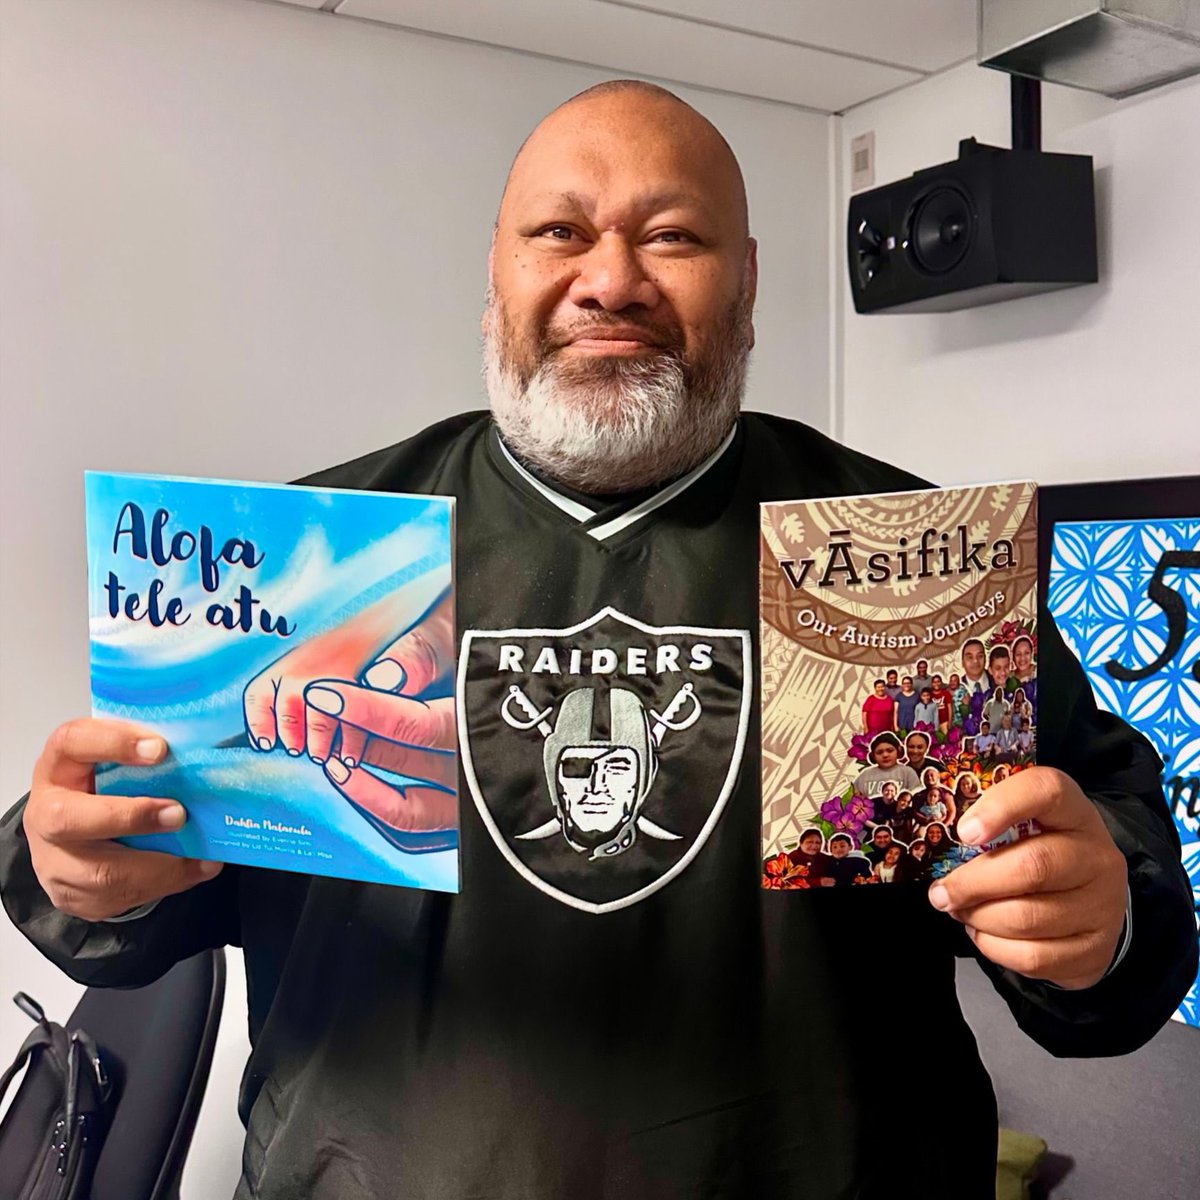 Faafetai tele lava 2 everyone who has bought a tusi in support of Autism Acceptance Month #April ❤️🧩✨ With well over 100 copies of our Vāsifika title sold this month, we feel so very blessed to be able promote Autism awareness all year round for our tamaiti & Pasifika families